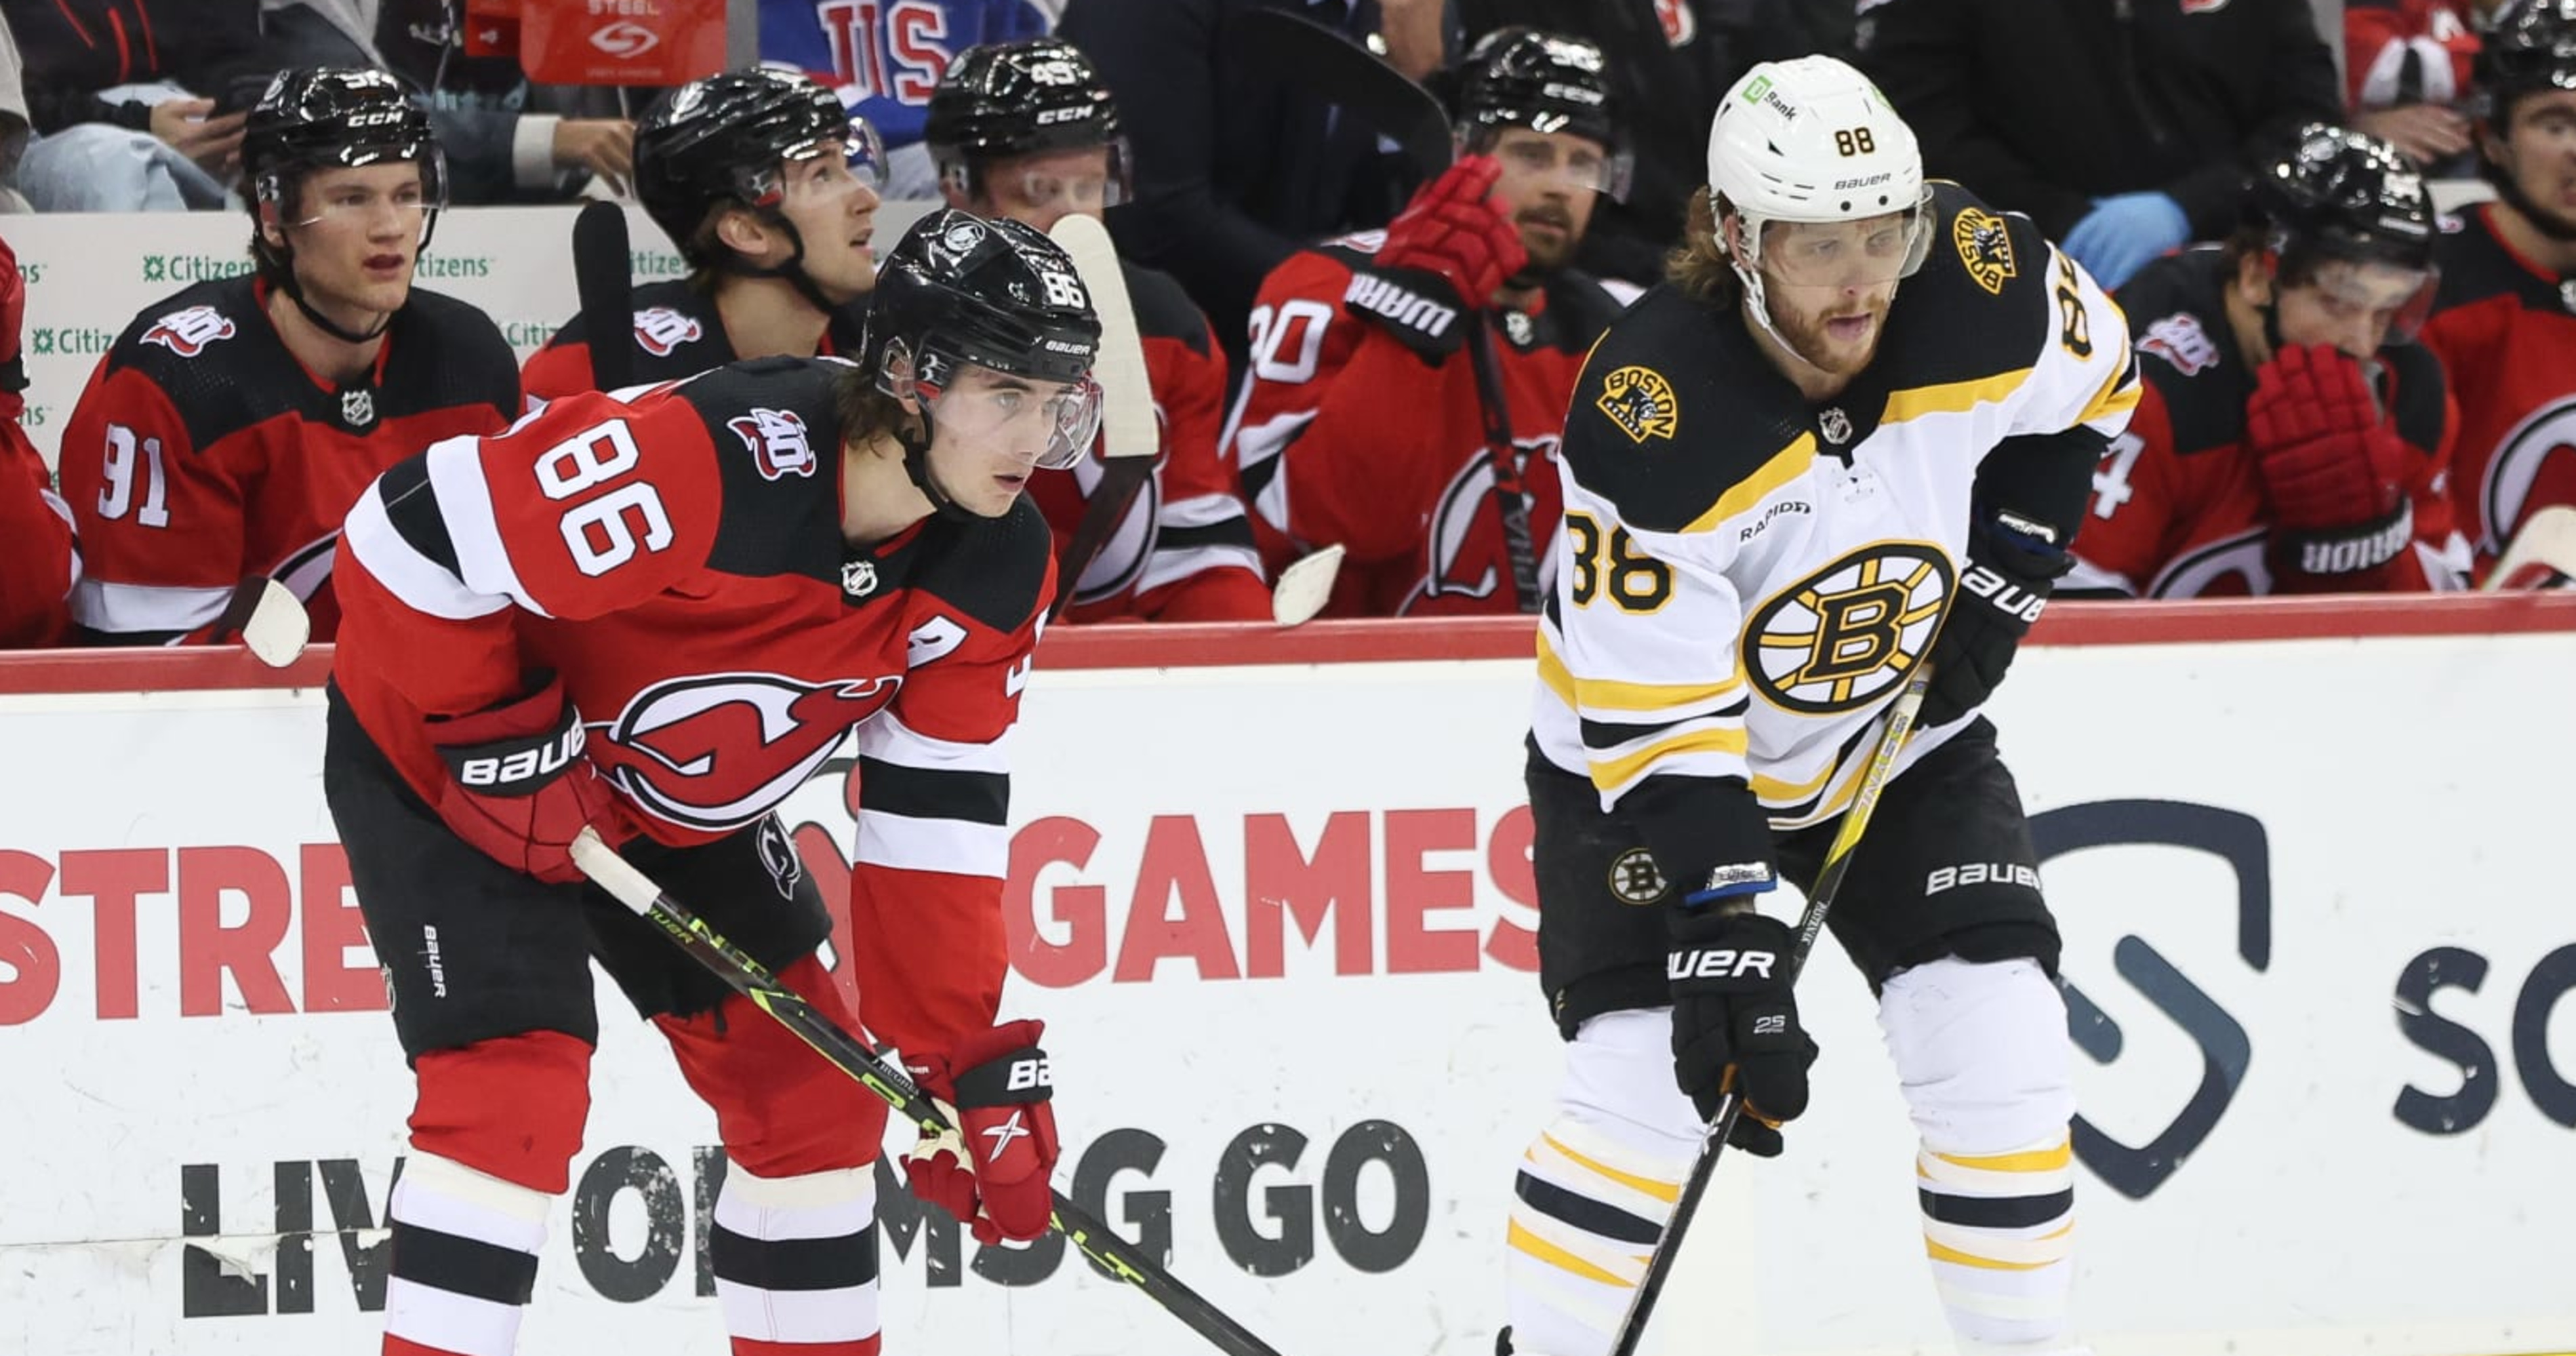 Game Preview #53: New Jersey Devils vs. Boston Bruins - All About